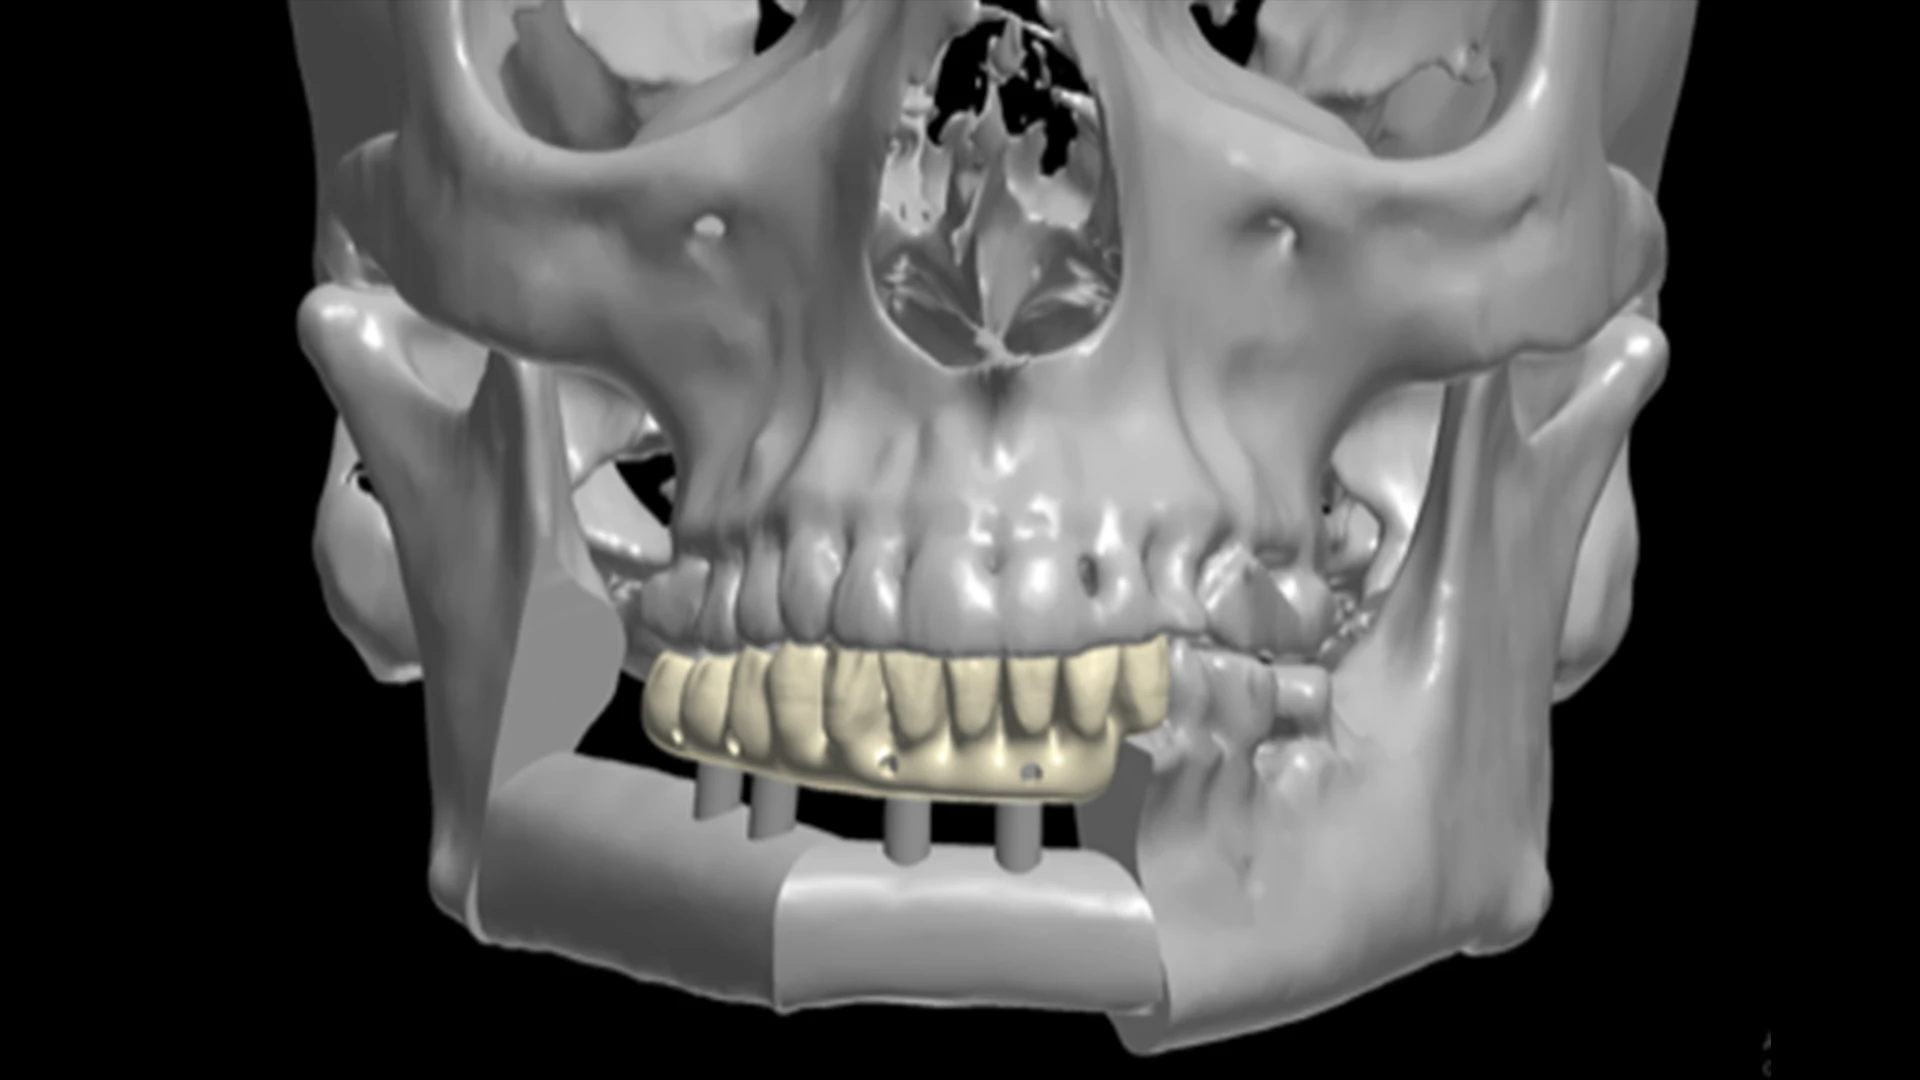 The plan for the teeth to be created prior to the surgery.